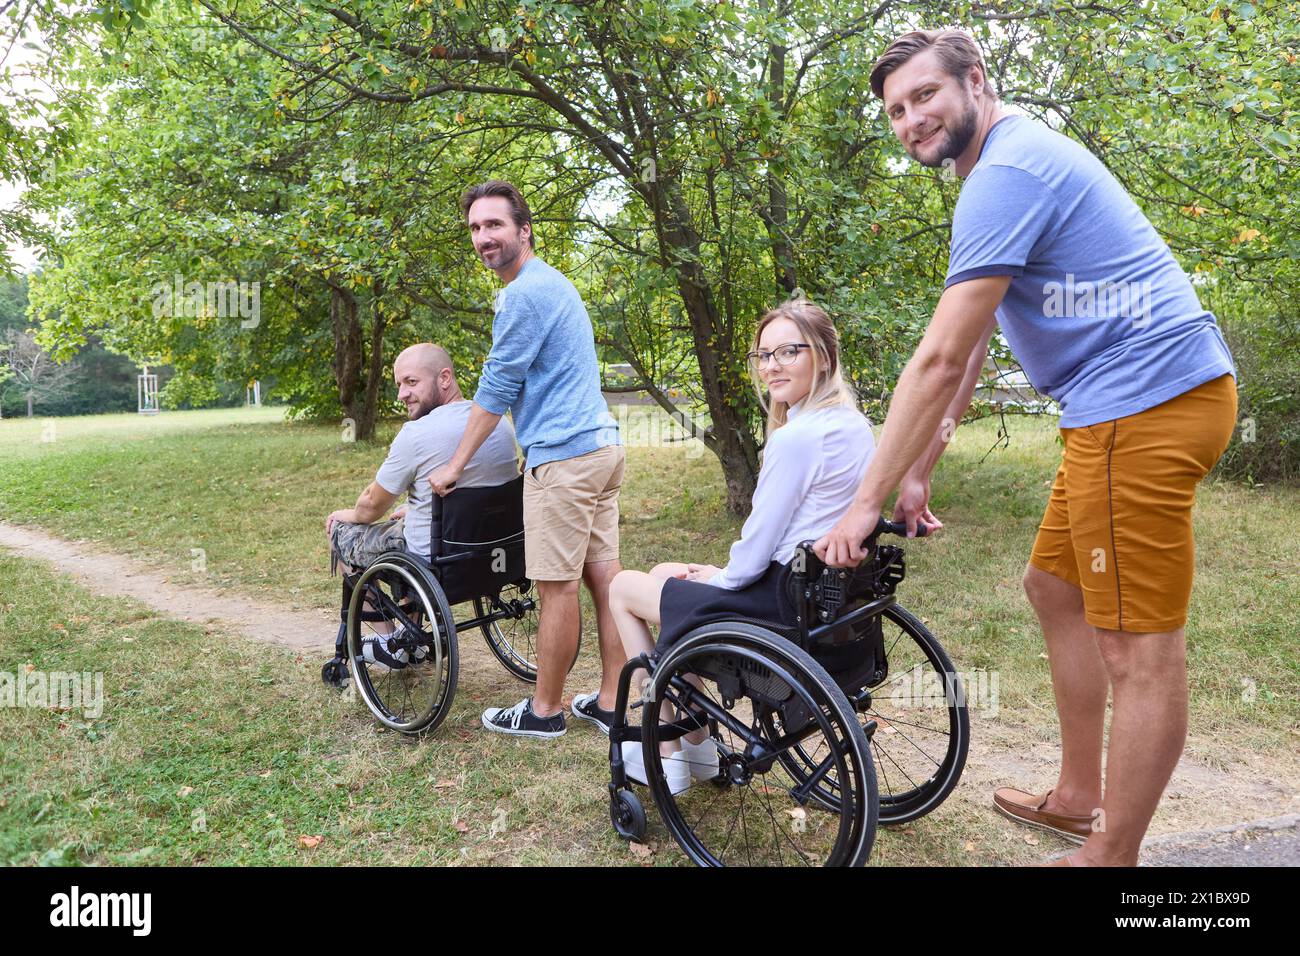 Group of friends, including people using wheelchairs, sharing a joyful time together outdoors surrounded by greenery. Stock Photo